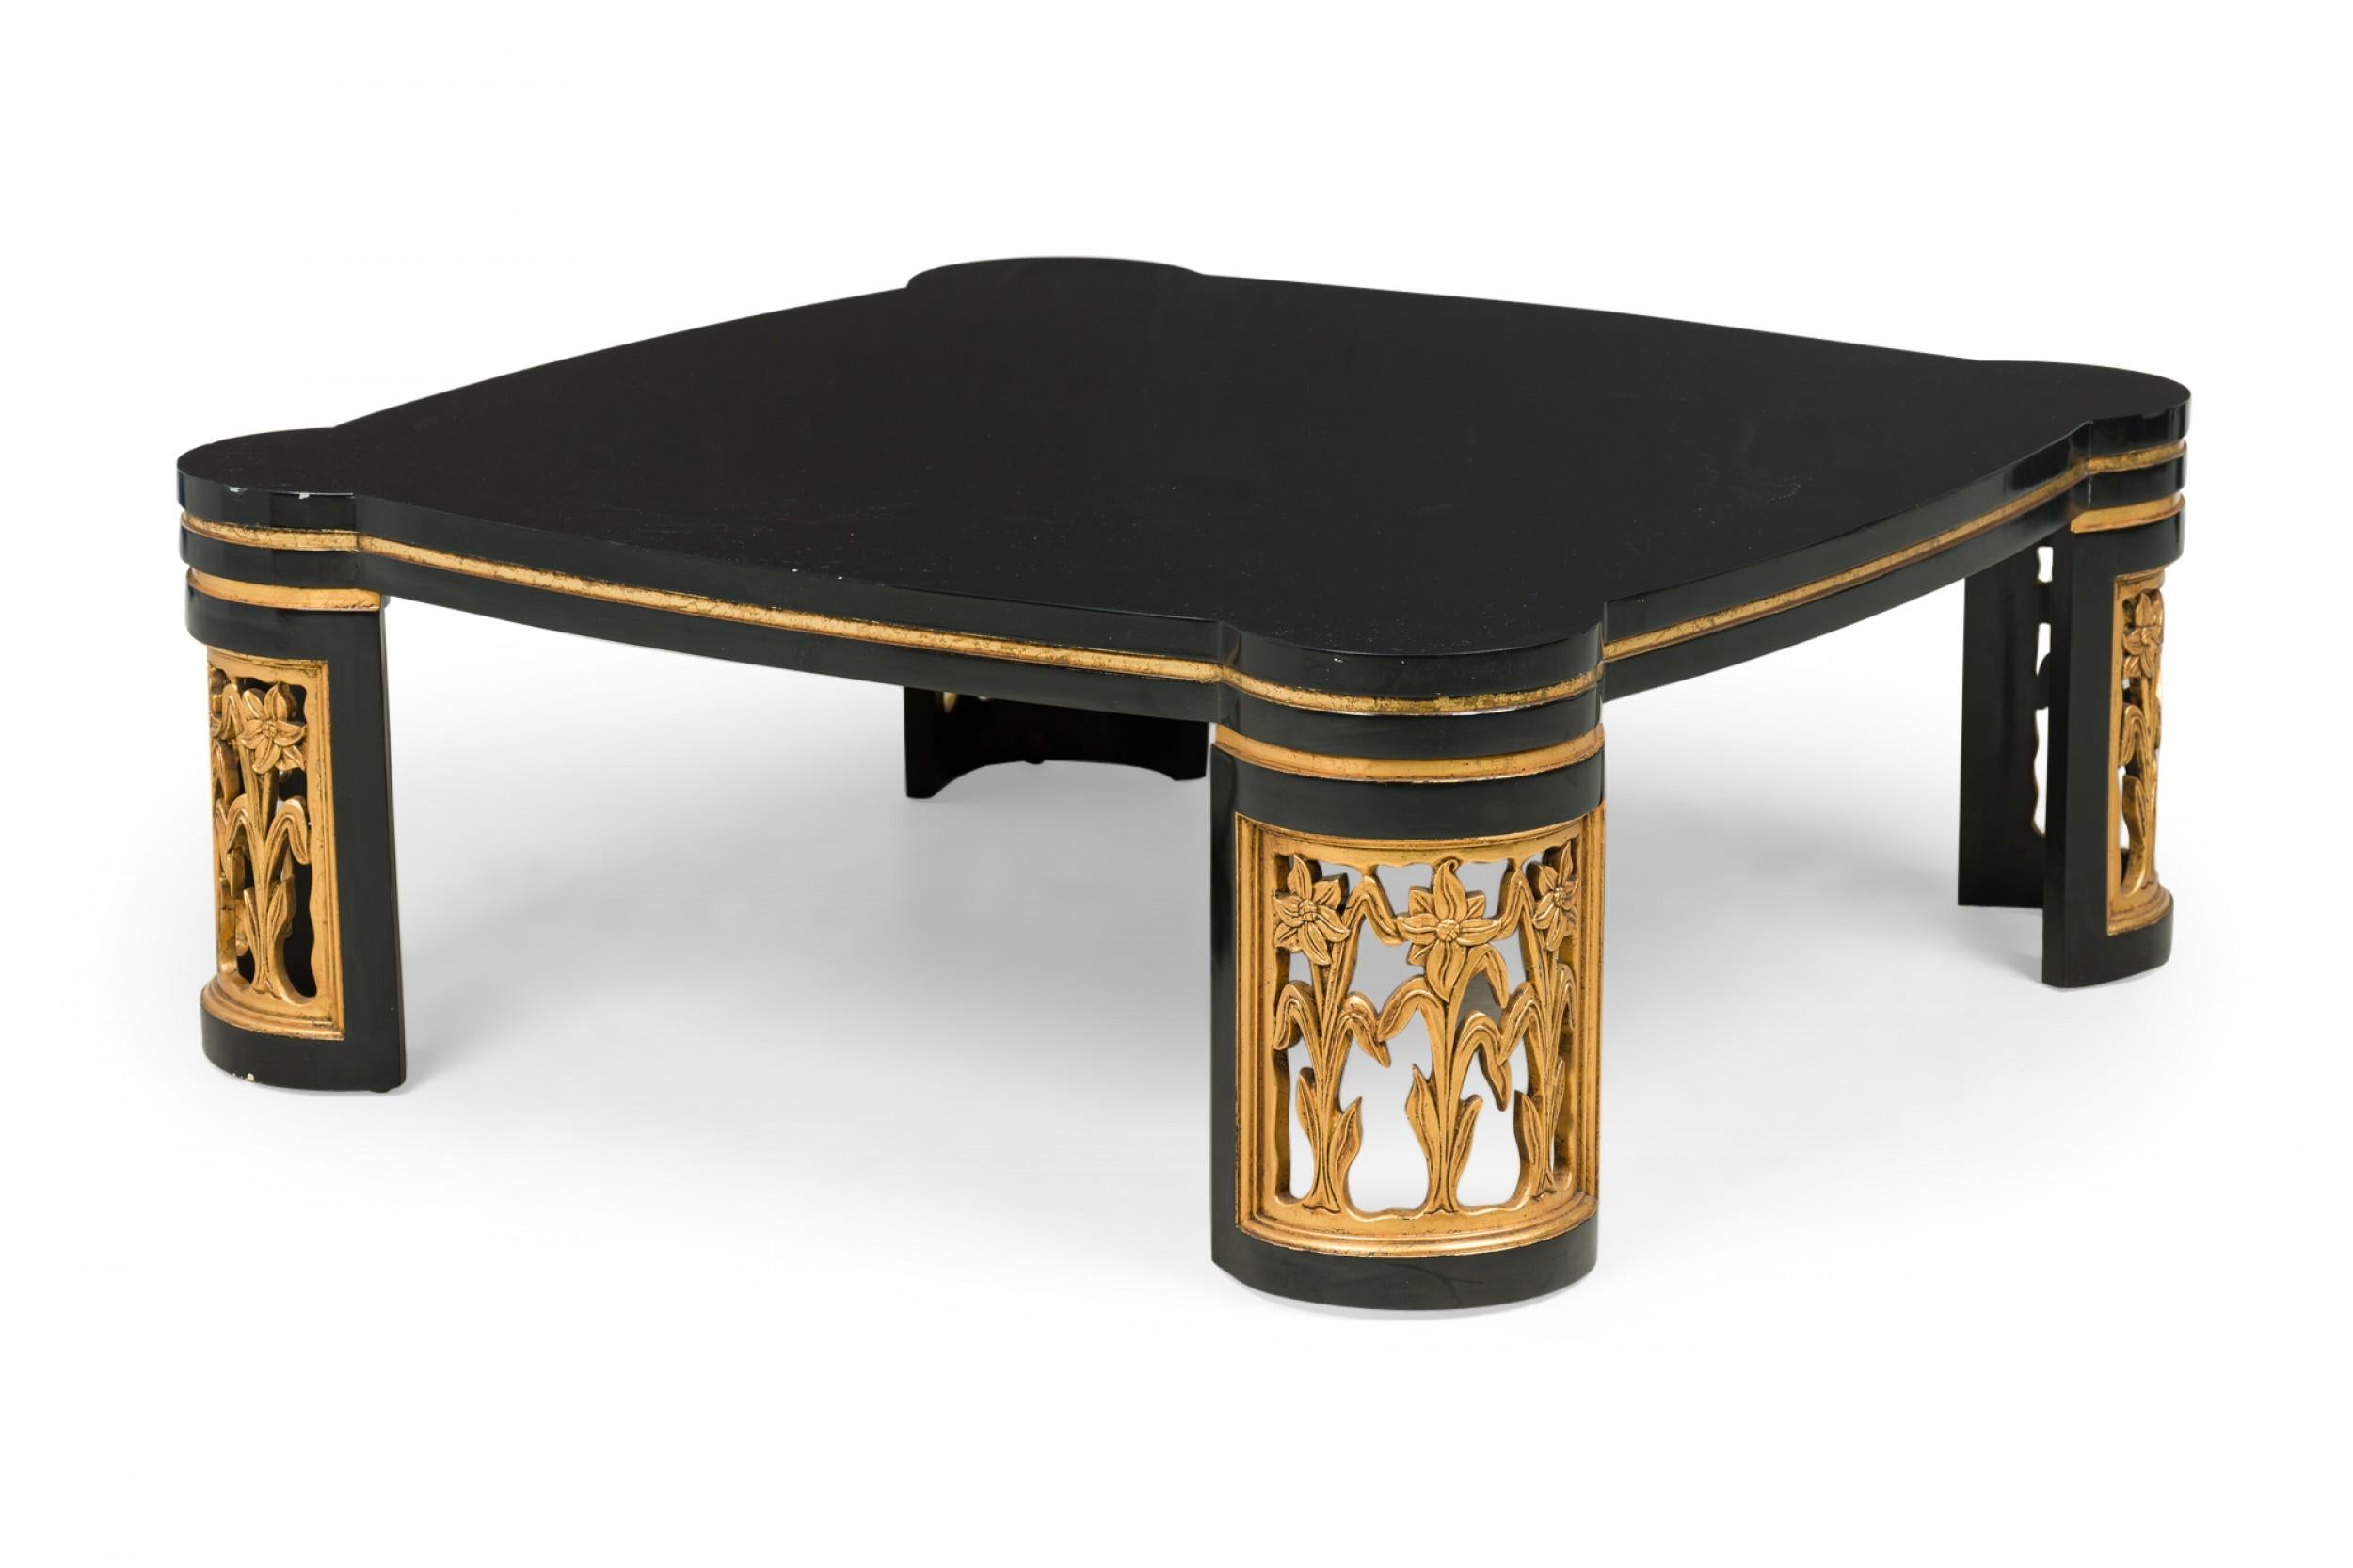 20th Century American Black Lacquer Floral Parcel Gilt Low / Coffee Table, Attributed to Jame For Sale